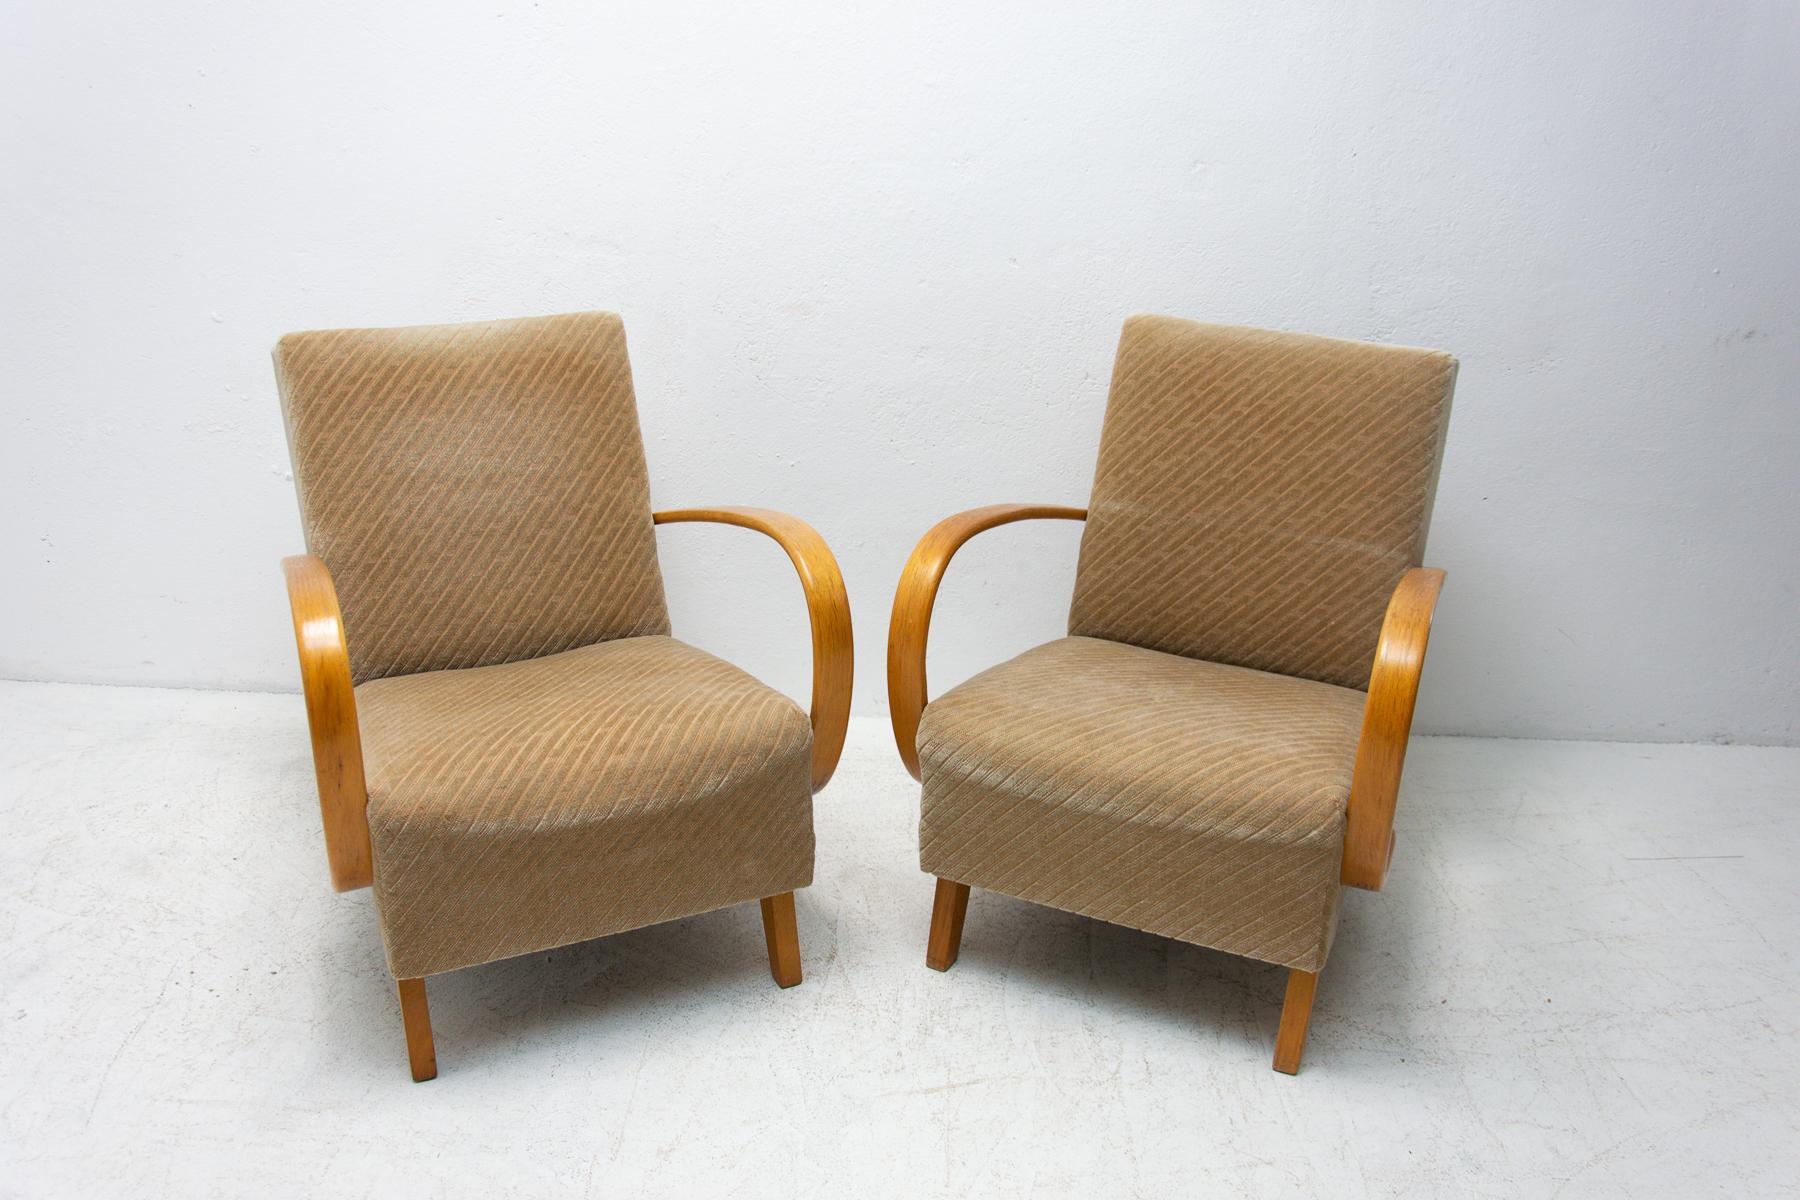 This pair of bentwood armchairs “C” was designed by Jindrich Halabala and were produced by UP Závody in the 1950´s. The chairs are stable and comfortable and in very good condition, they were be reupholstered in the past. Price is for the